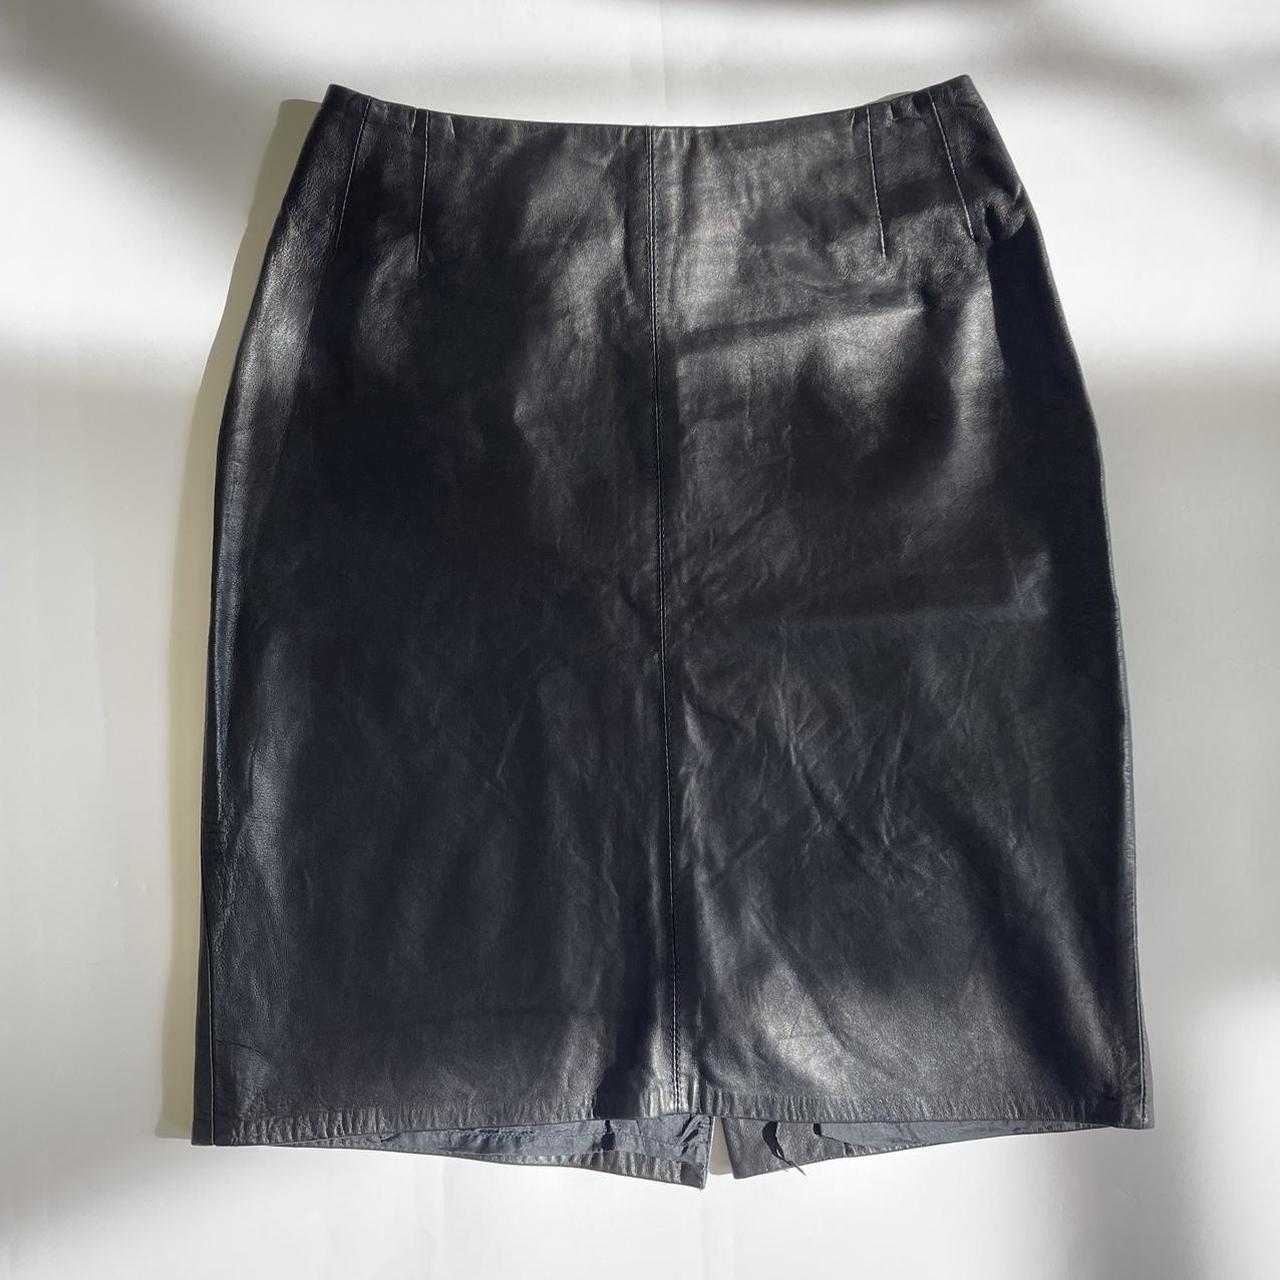 Black leather skirt super cute and great quality. It... - Depop